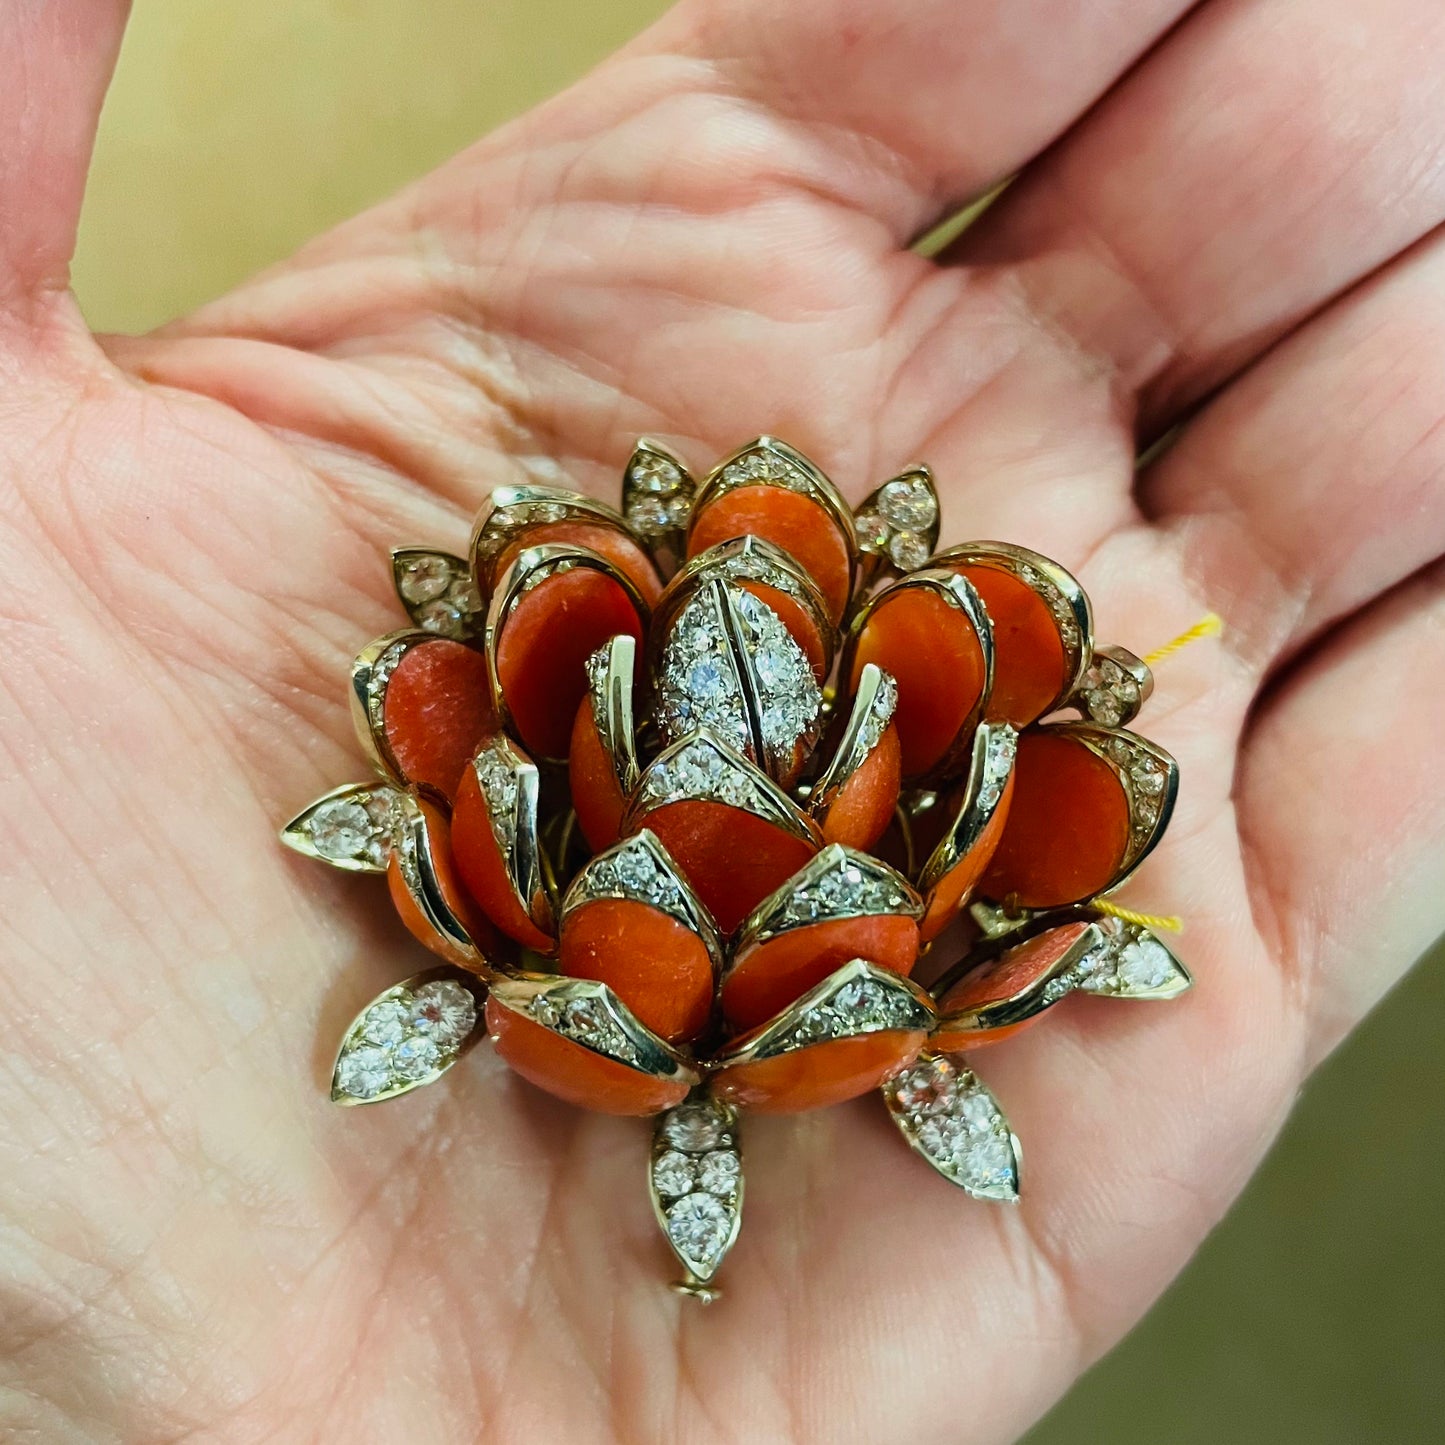 Enrico Serafini 1950s 18KT Yellow Gold Coral & Diamond Water Lily Brooch in hand